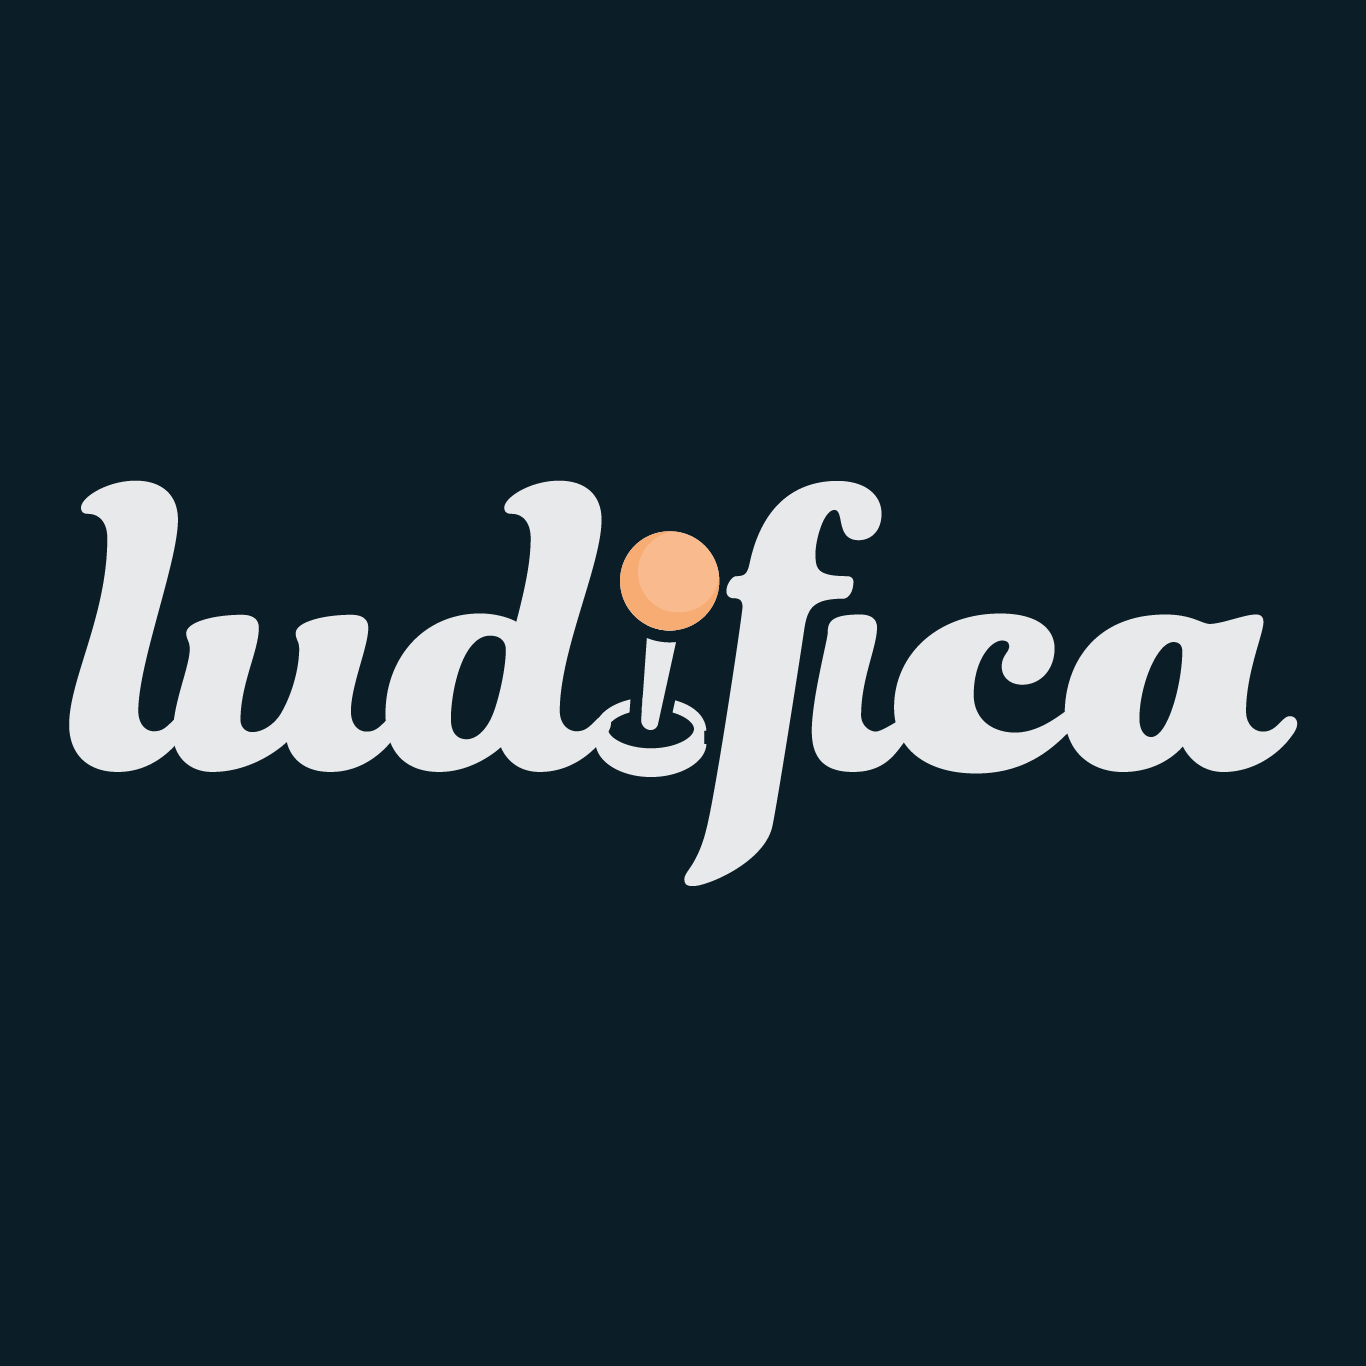 Ludifica pioneers gamification mobile apps like Totemus, monetizing user communities while receiving recognition for innovation and expanding their market presence.